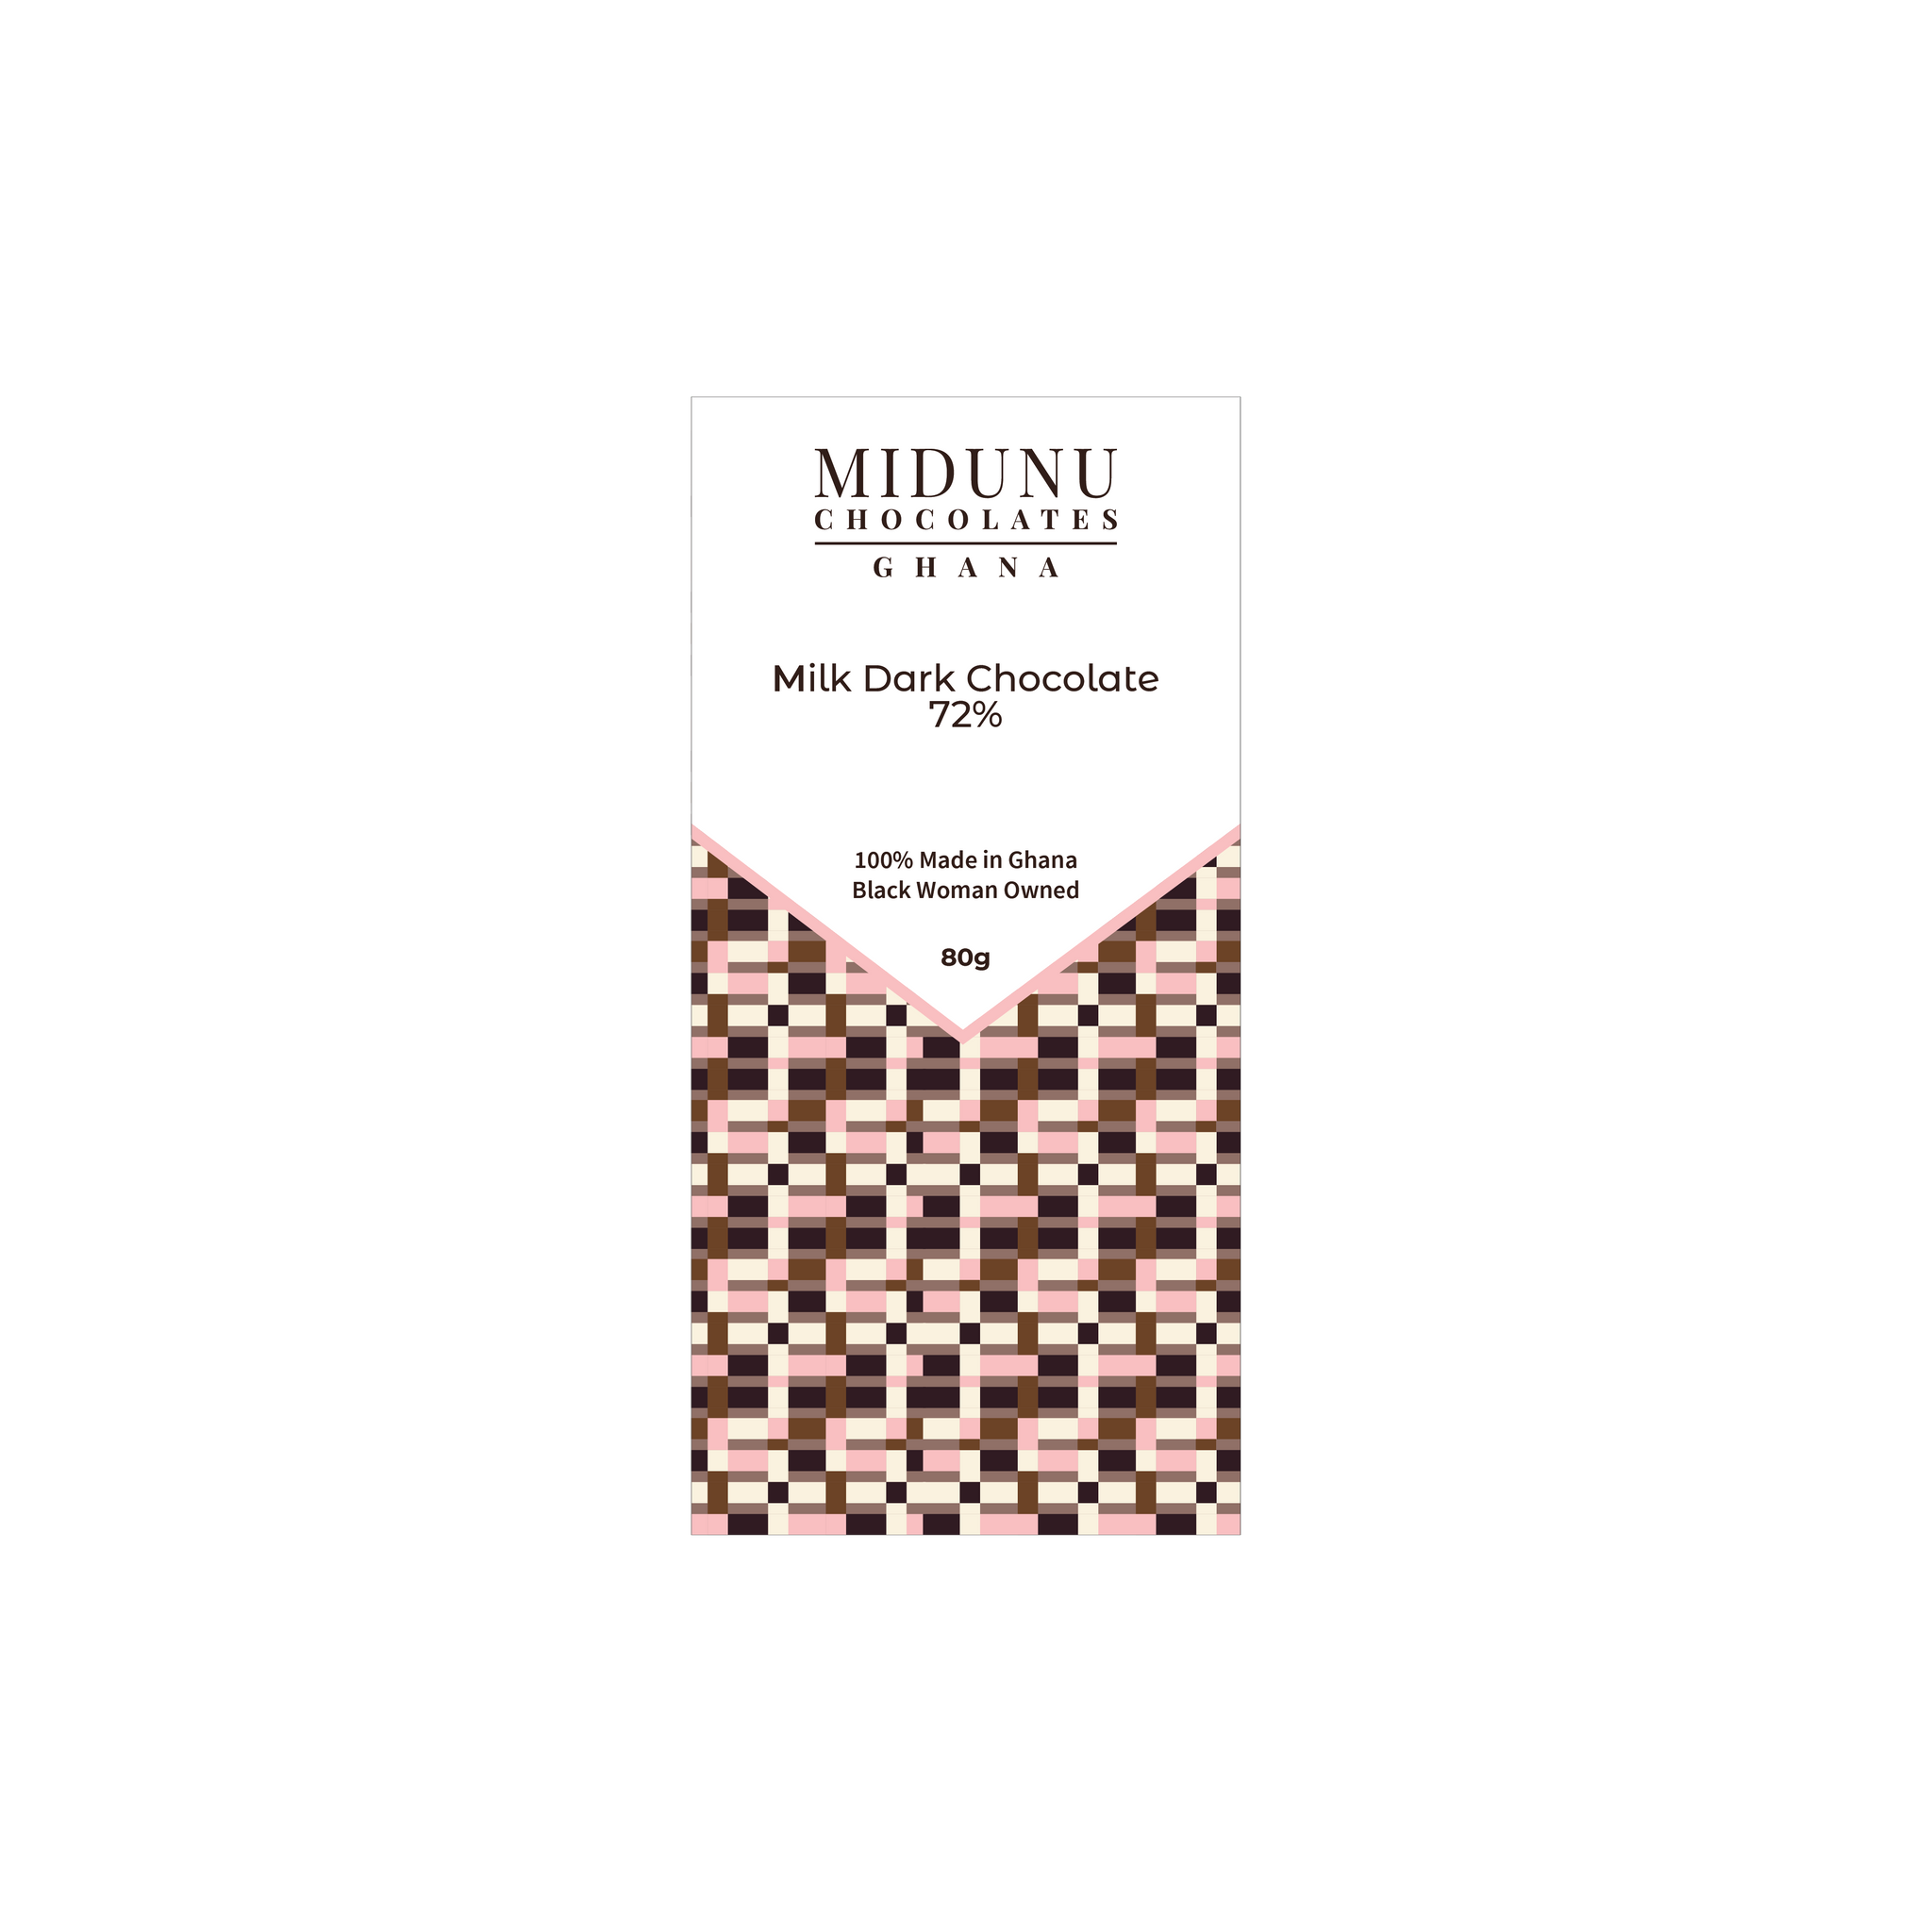 Midunu Chocolates are created by an award winning chef in Accra, Ghana. The traditional method of fermenting cocoa beans in plantain and banana leaves instills a unique flavor.  In this bar, expect intense cacao and creamy caramel notes.